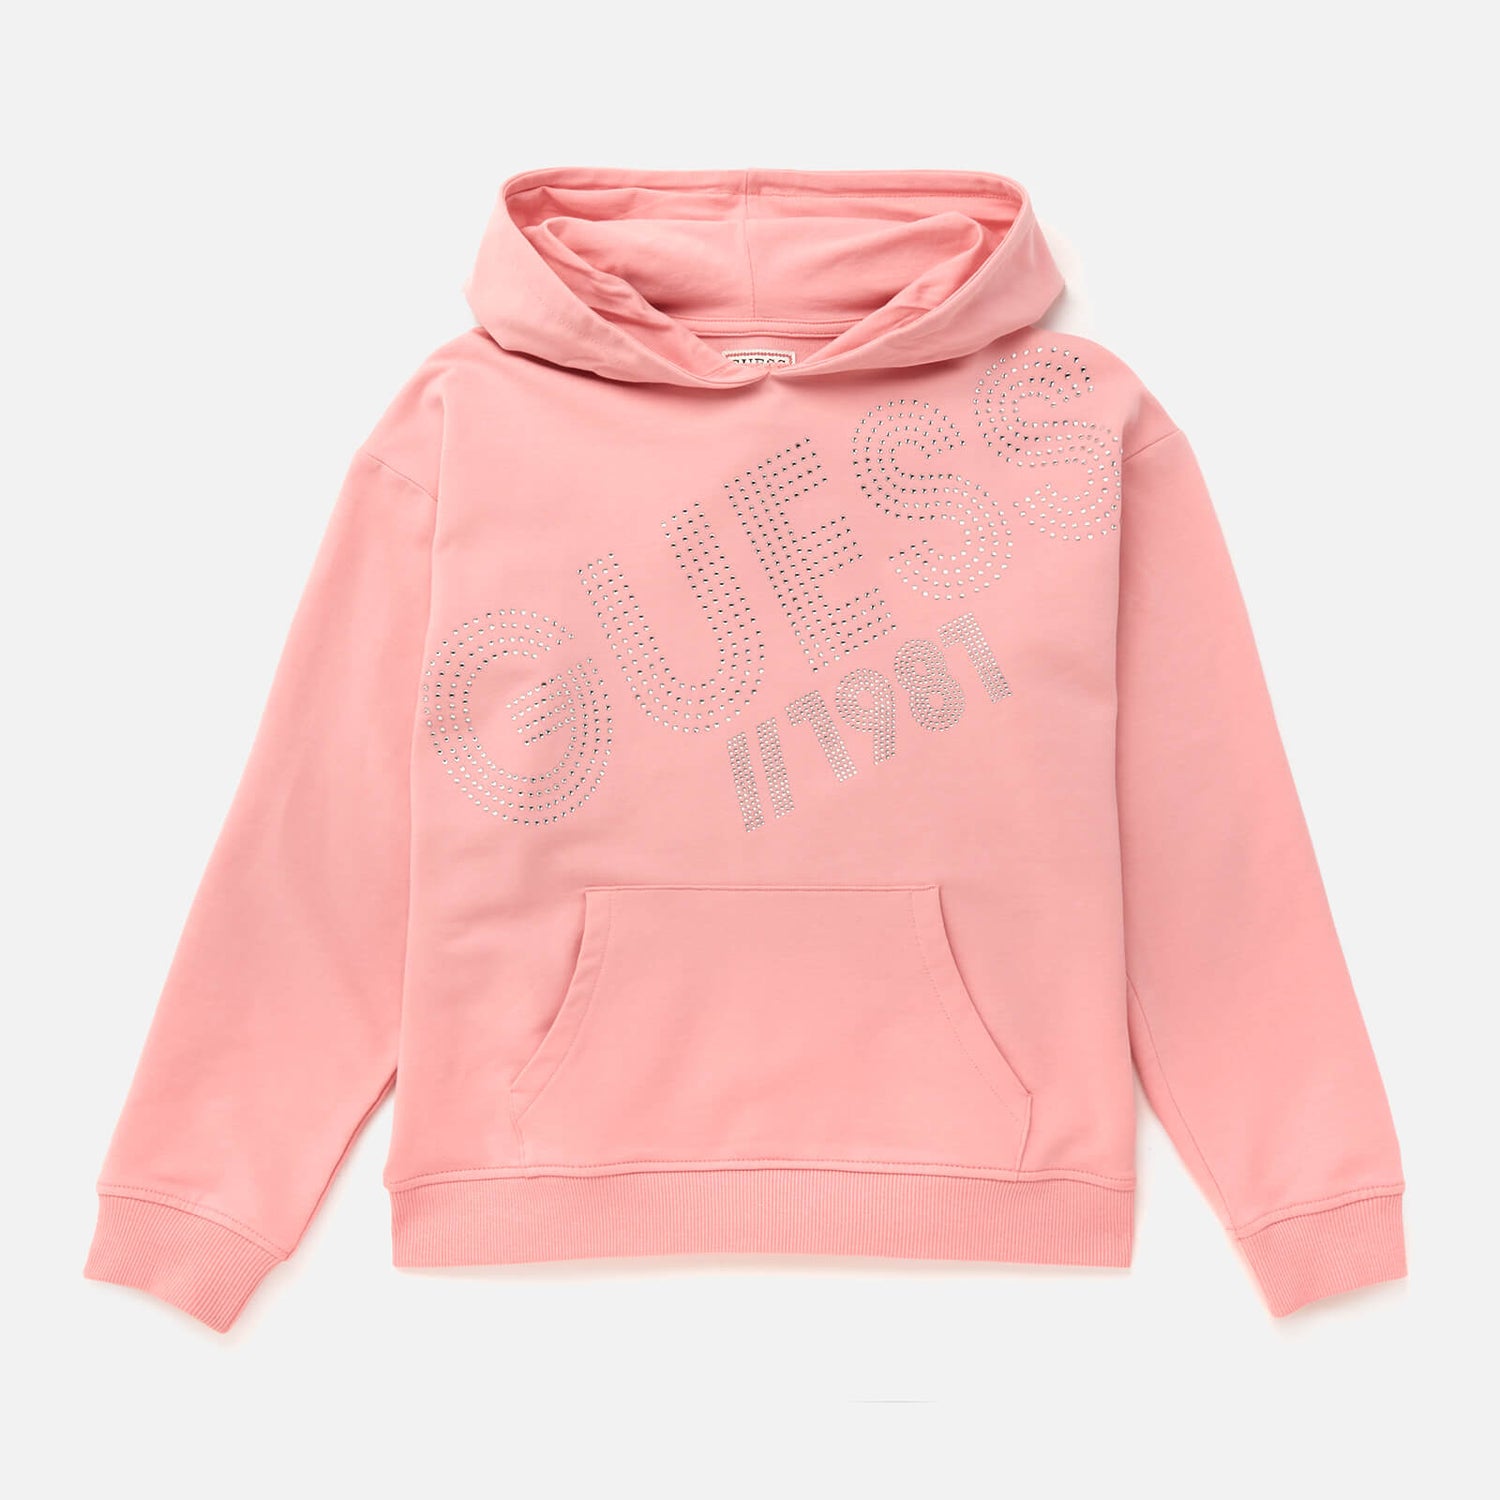 Guess Girls' Hooded Logo Active Top - Pop Gum Pink - 3 Years